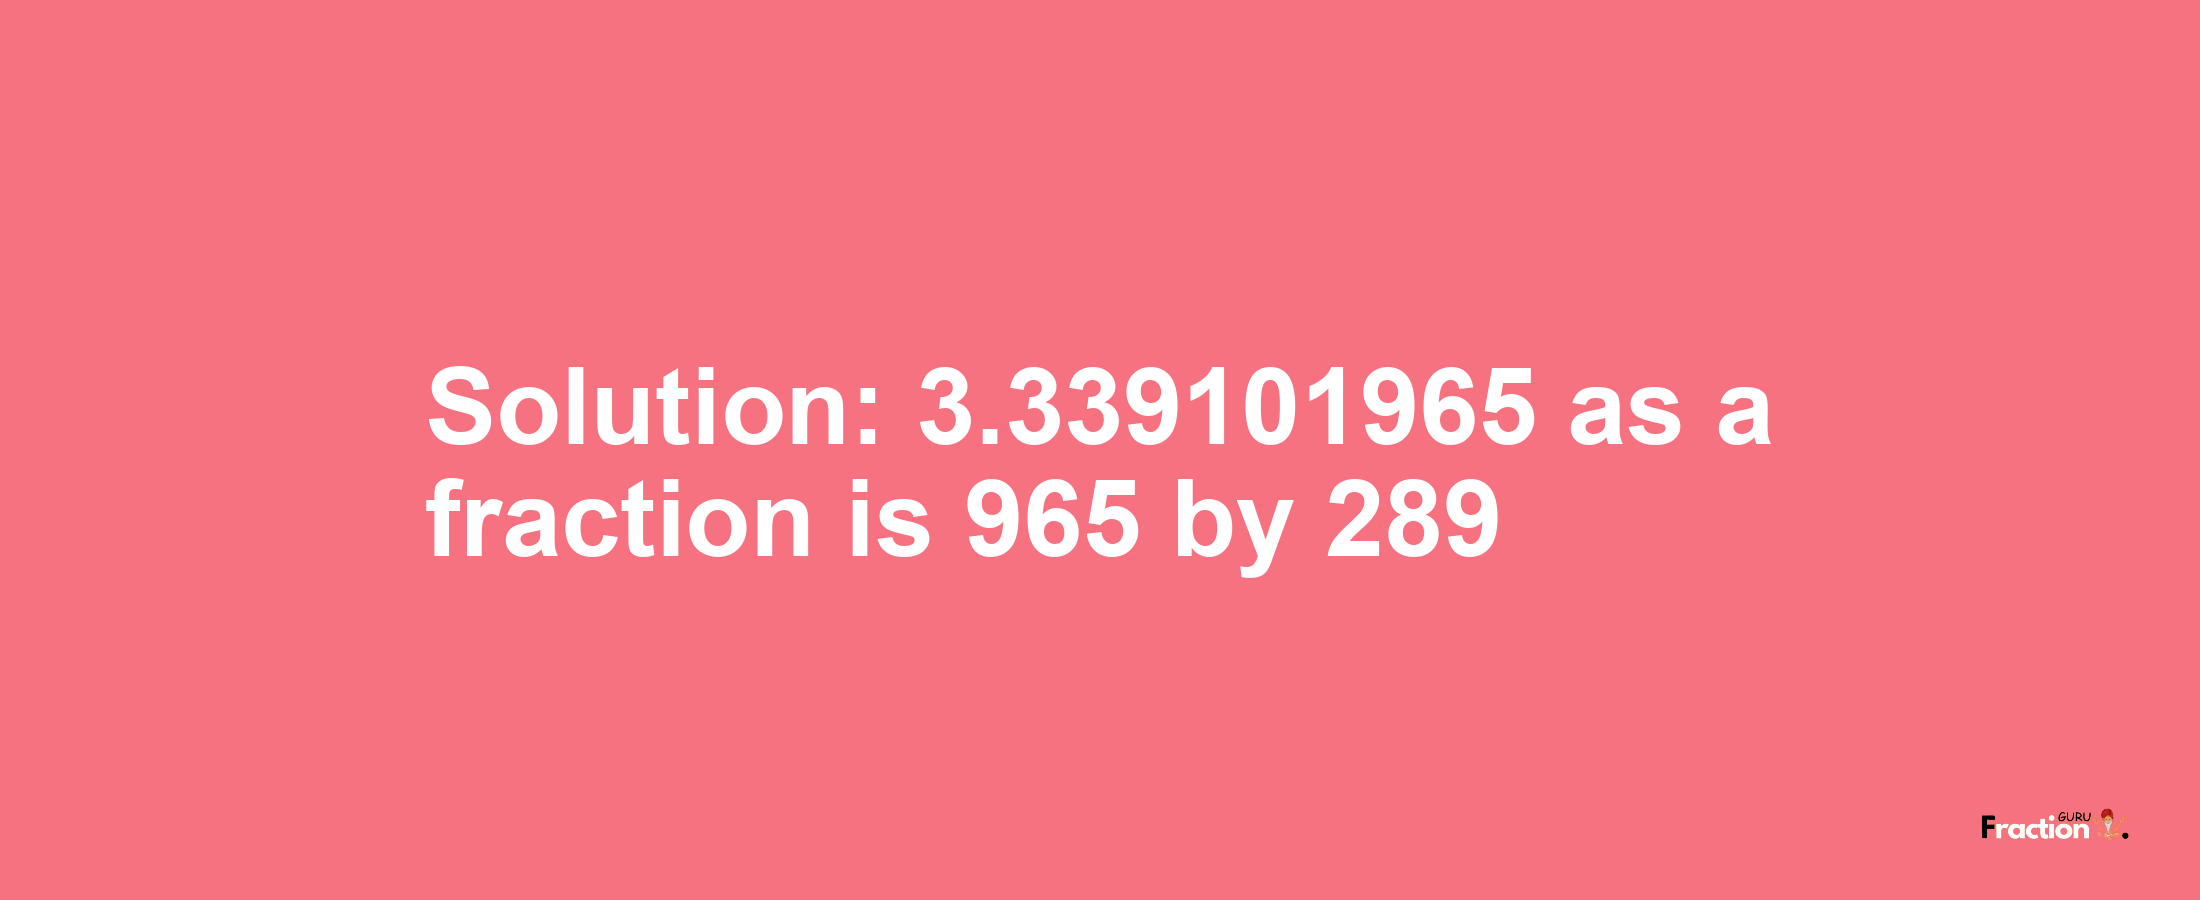 Solution:3.339101965 as a fraction is 965/289